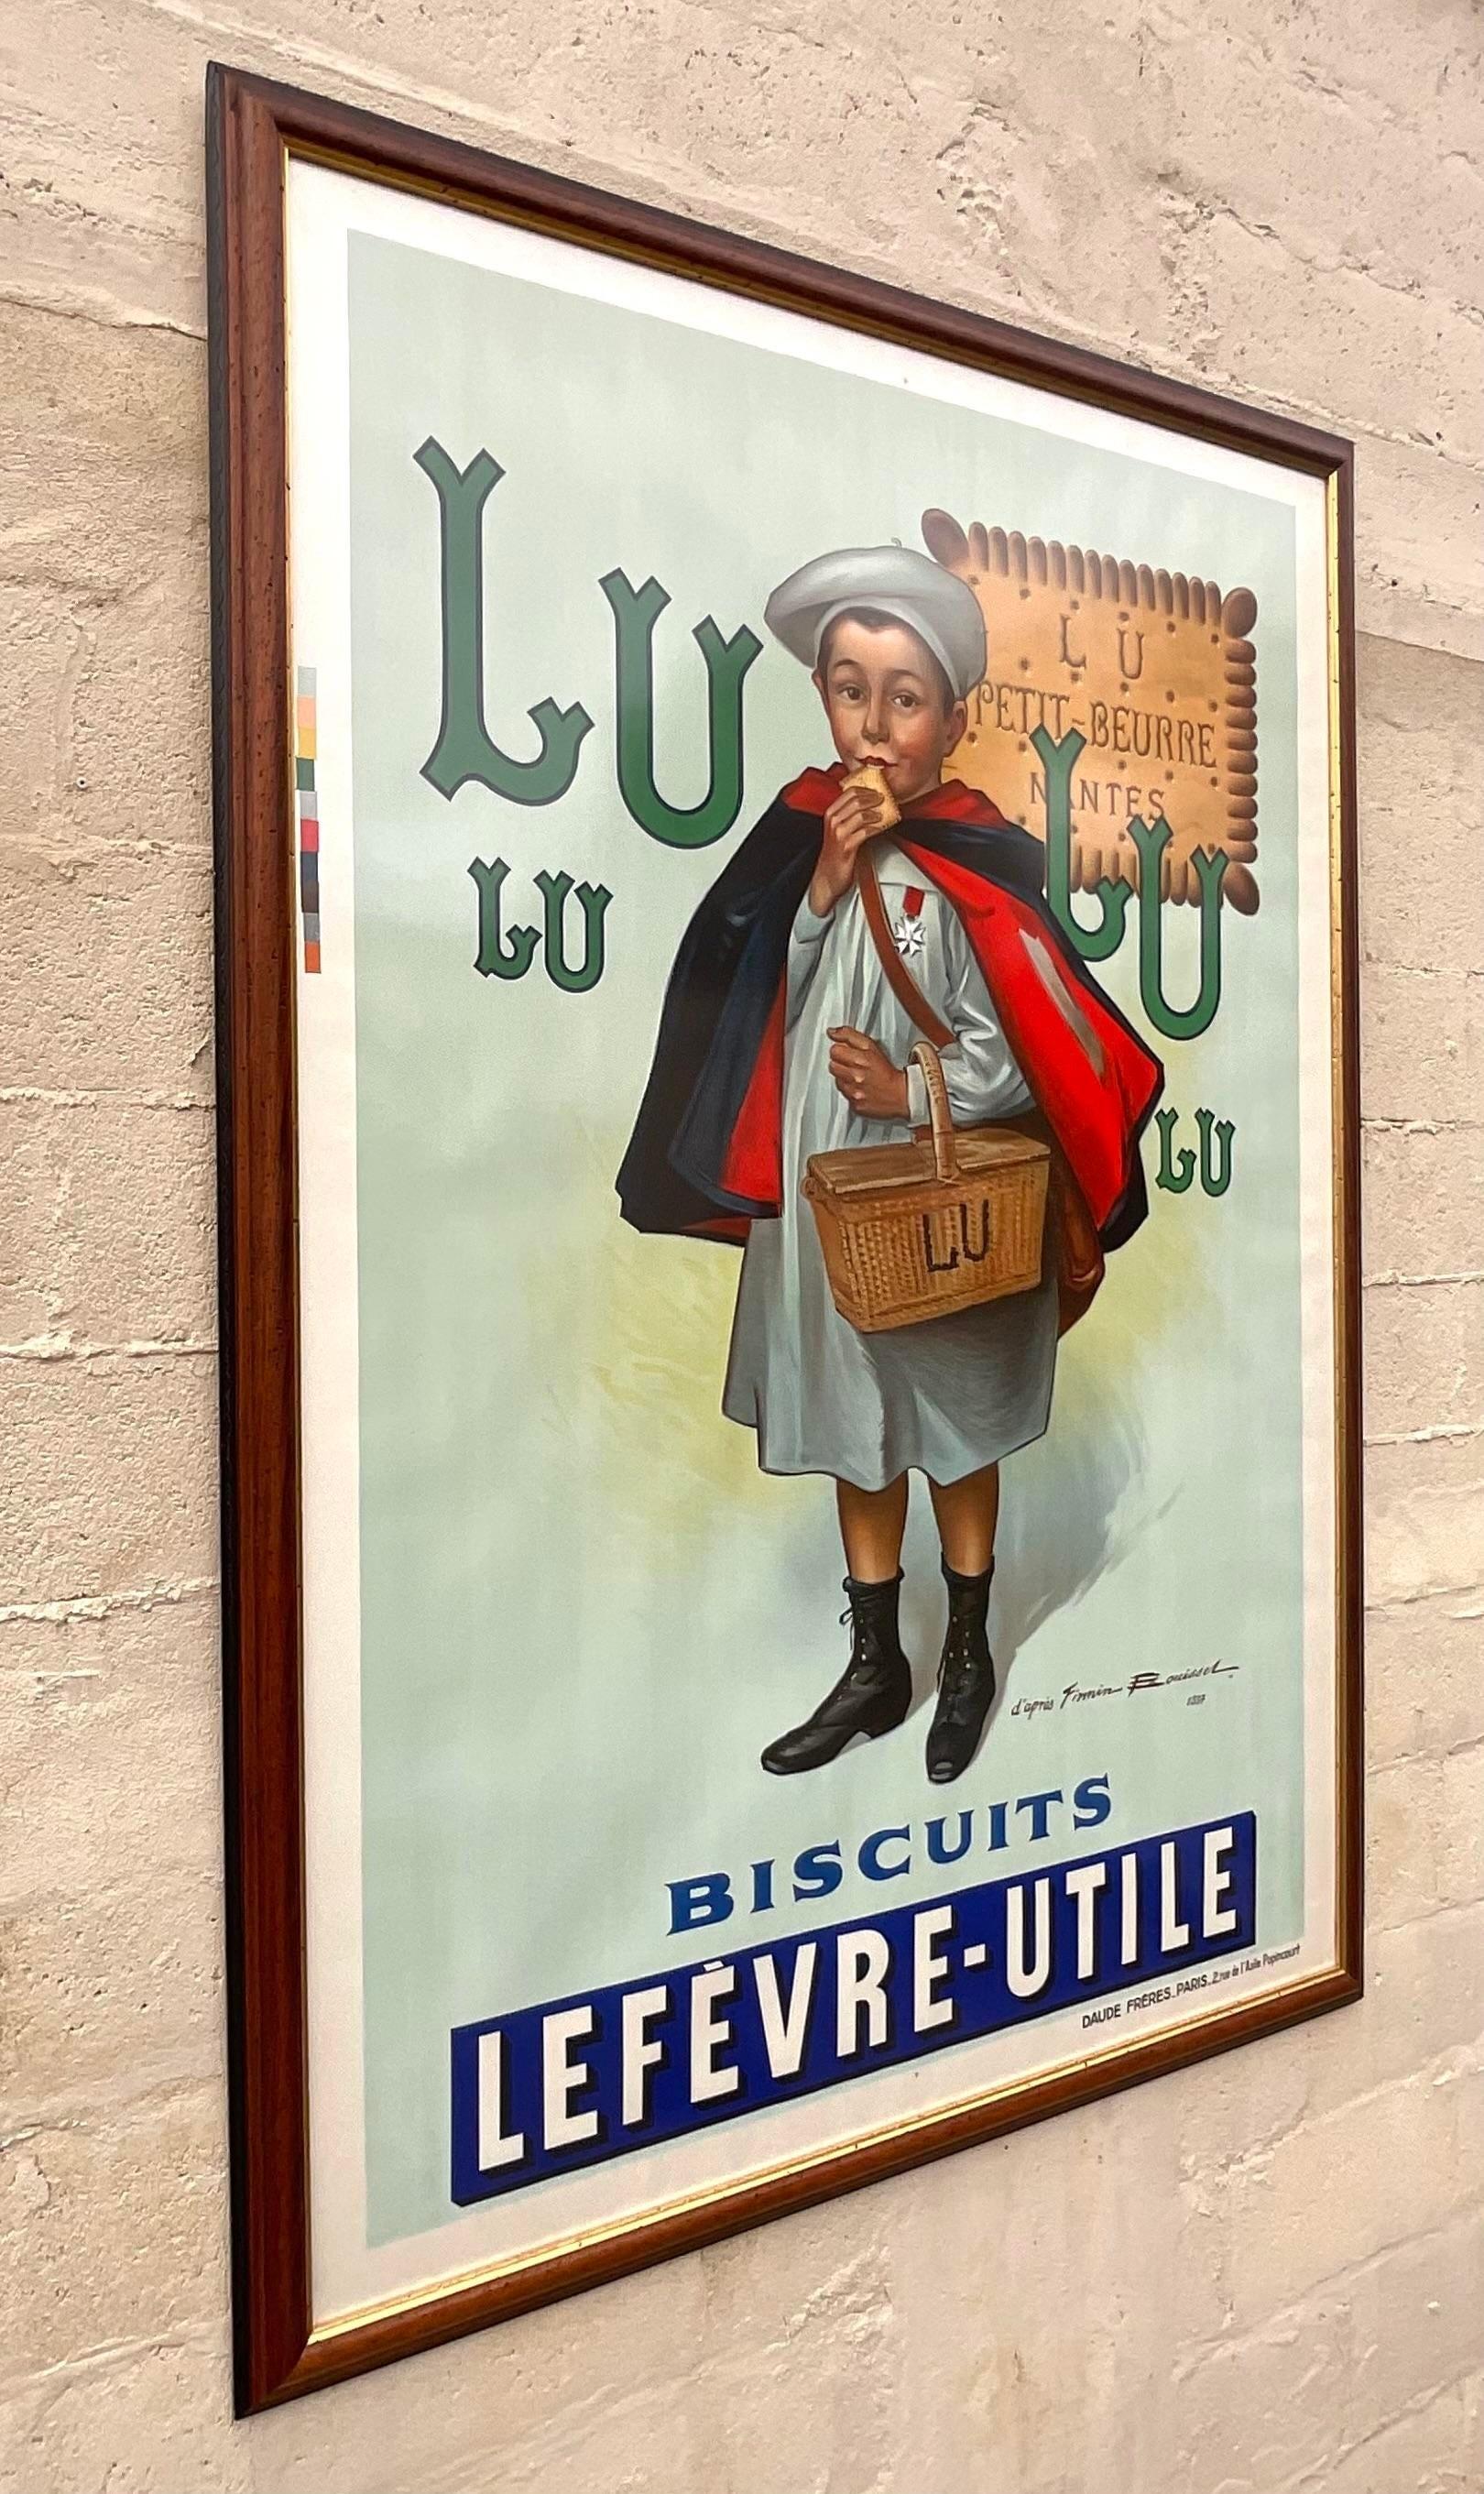 A fabulous vintage Boho Original lithograph. The coveted LuLu Le Petite Ecolier print. A charming young man advertising the iconic biscuit. Acquired from a Palm Beach estate.